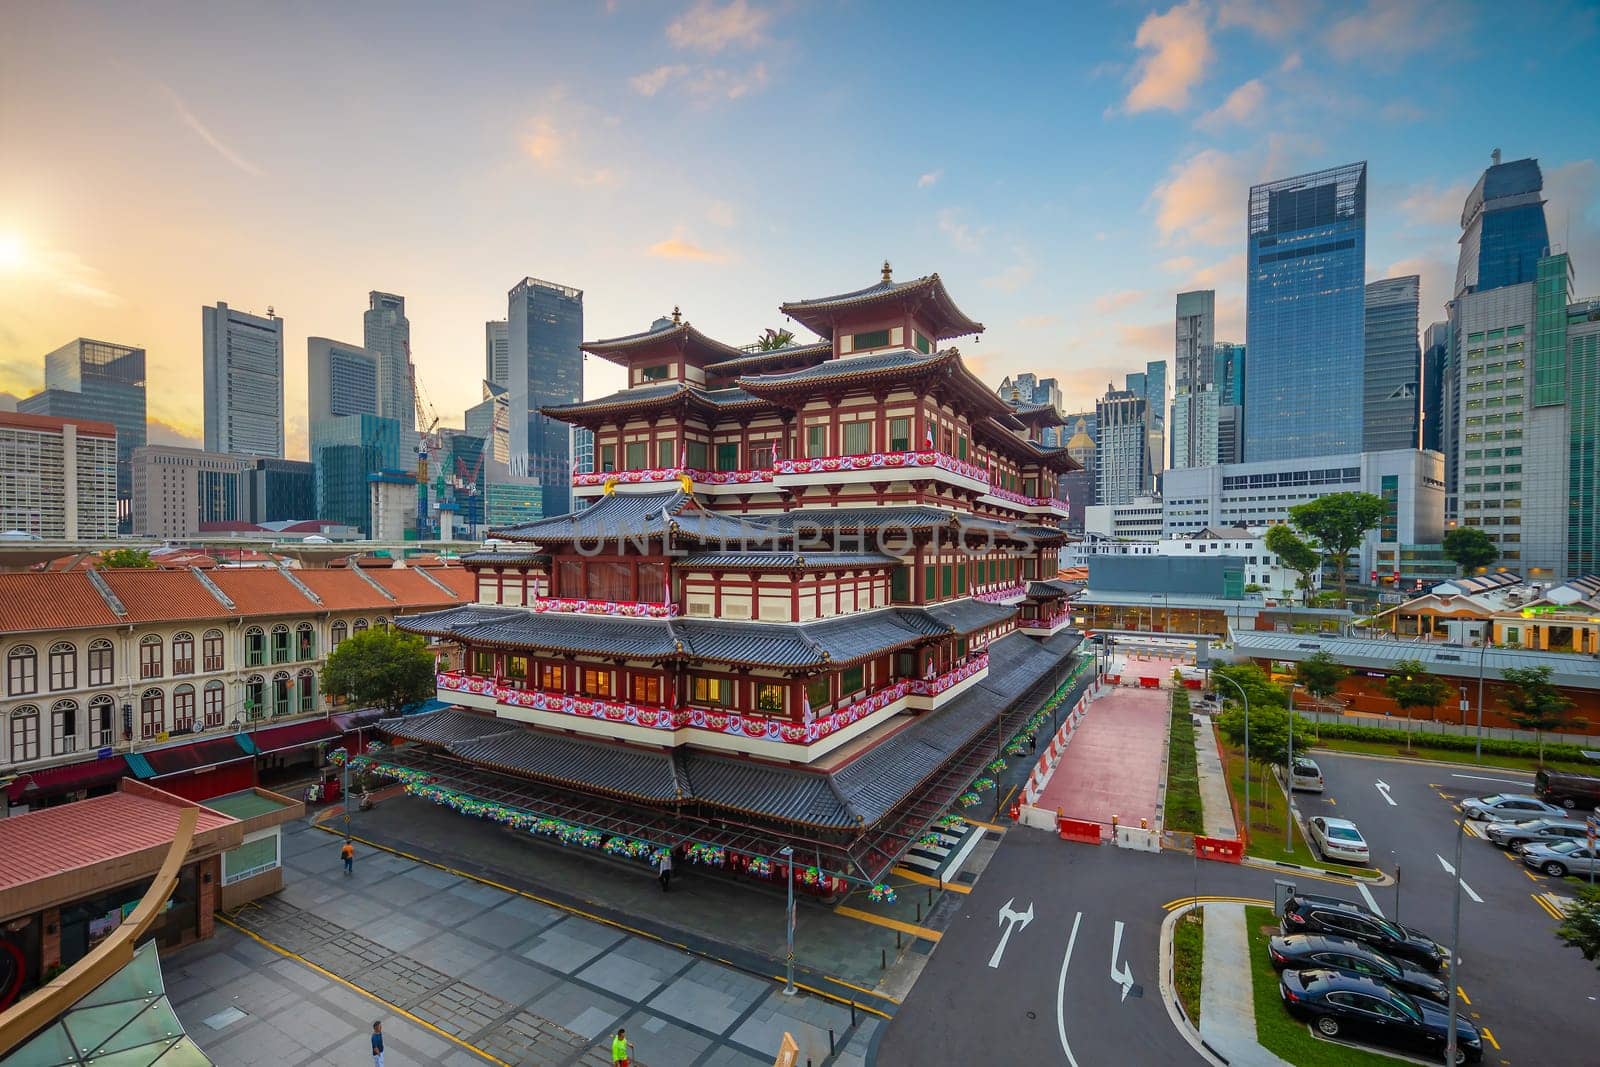 Buddha Toothe Relic Temple at Chinatown in Singapore